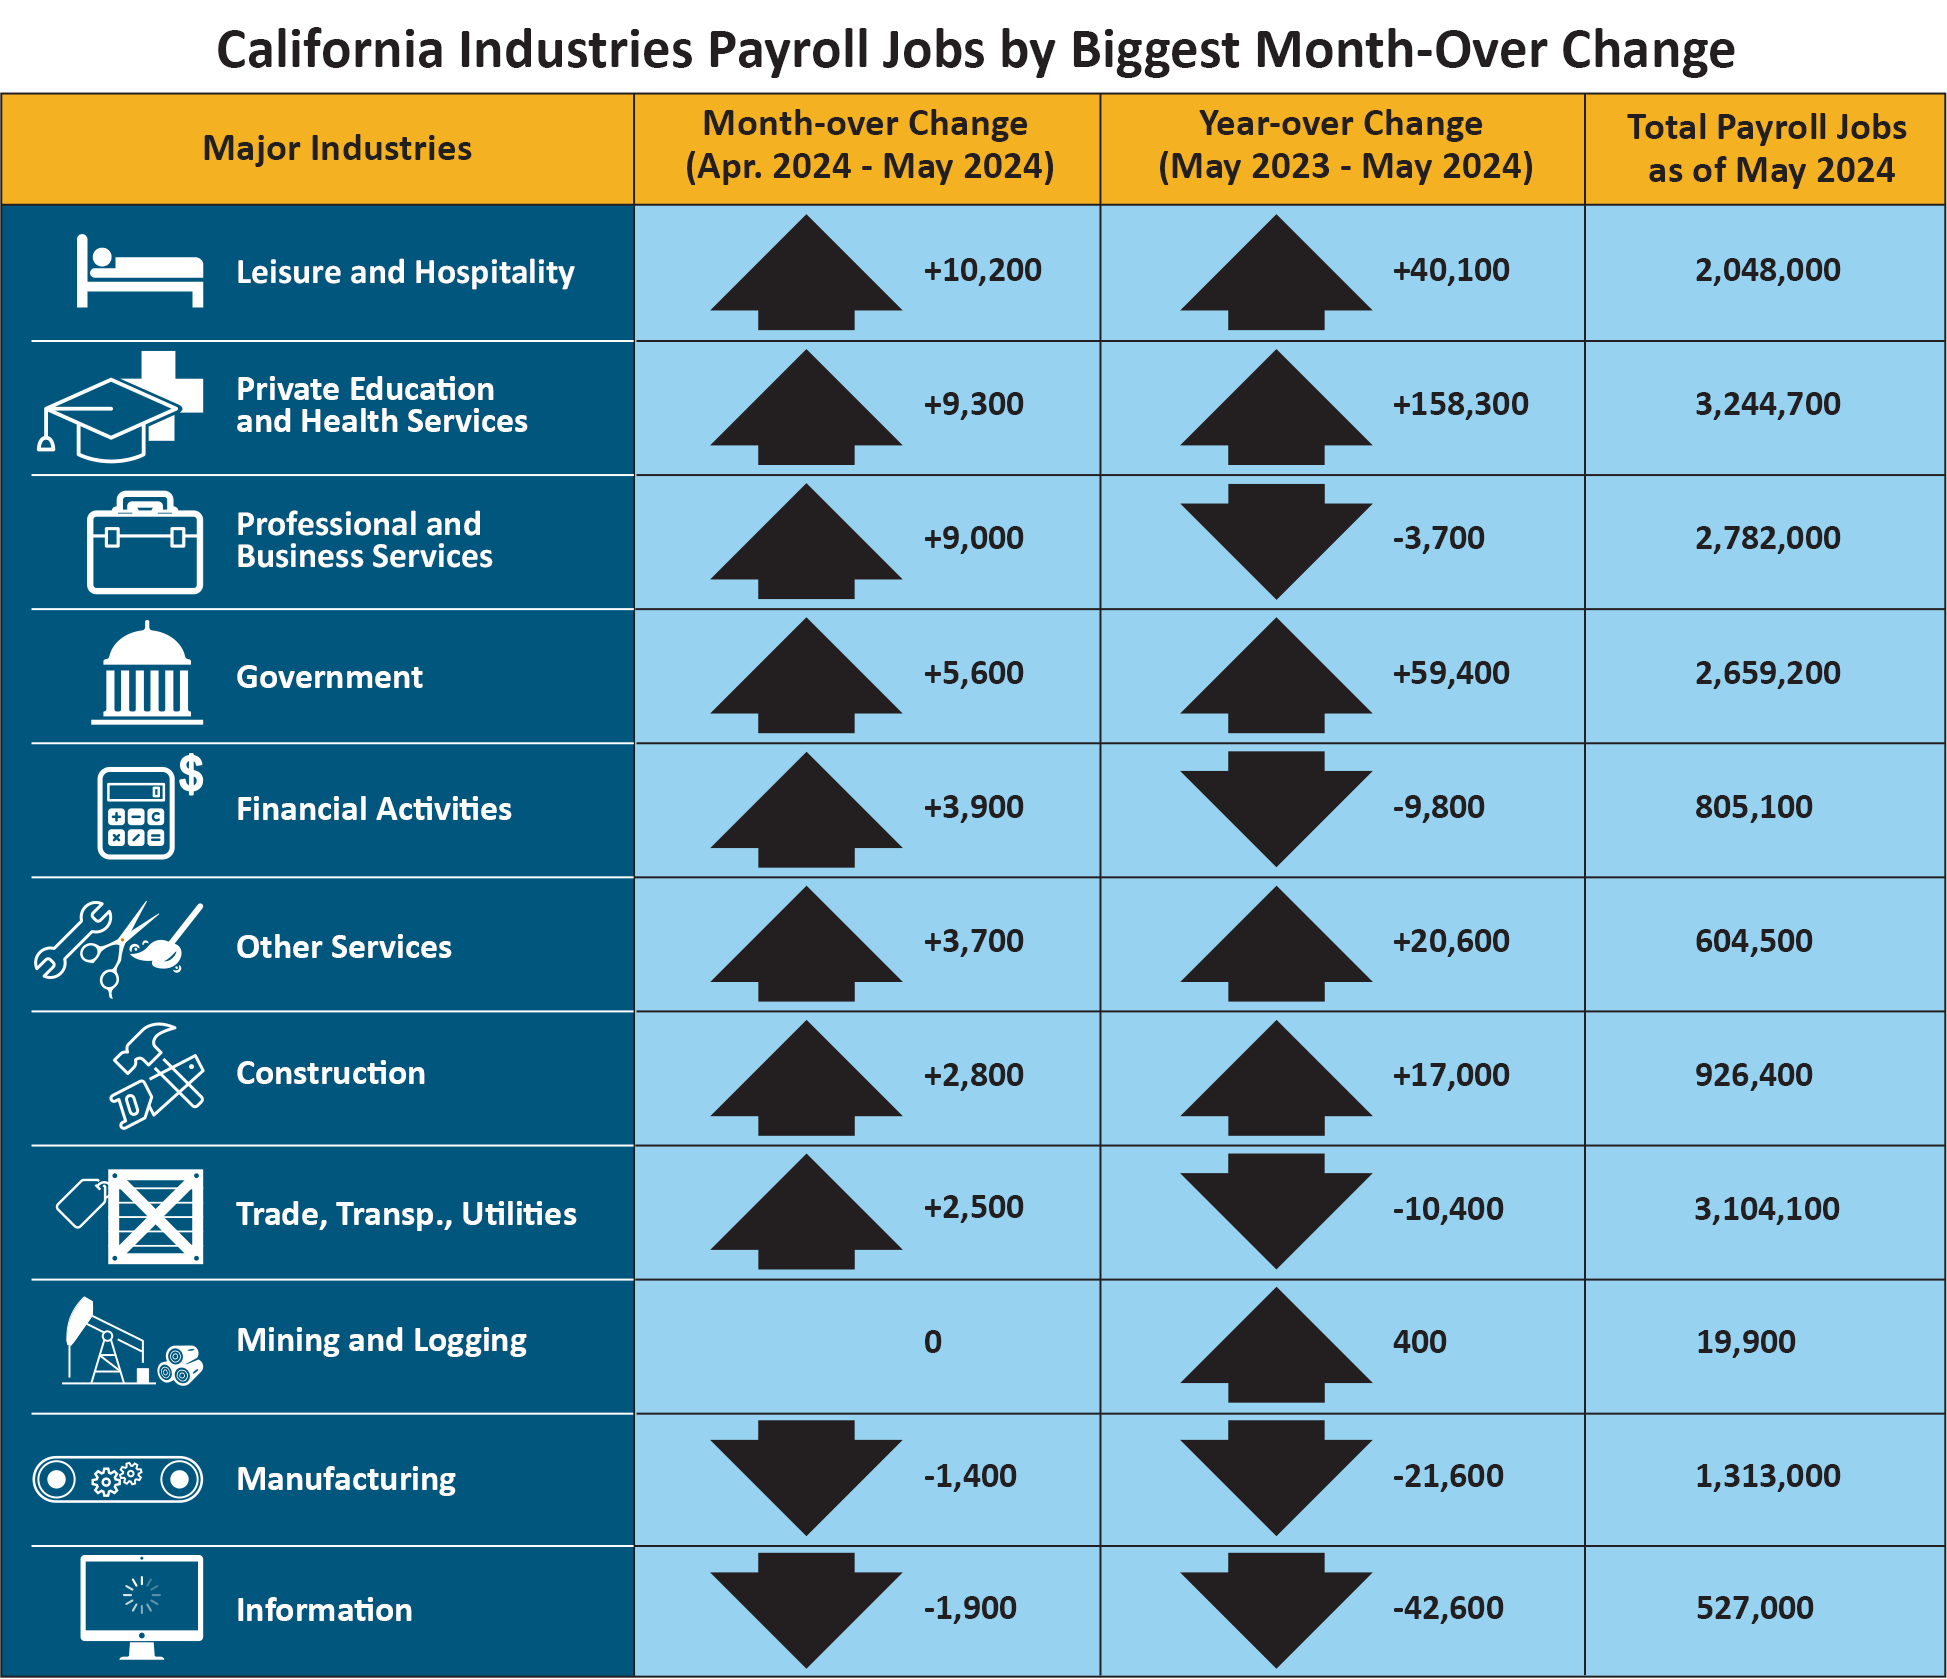 This table shows the number of California nonfarm payroll jobs grouped by major industries, with columns showing month-over and year-over change, plus total payroll jobs as of May 2024.  If you need an alternative format to access this information, contact the EDD Equal Employment Opportunity Office at EEOmail@edd.ca.gov or call toll free 1-866-490-8879. 